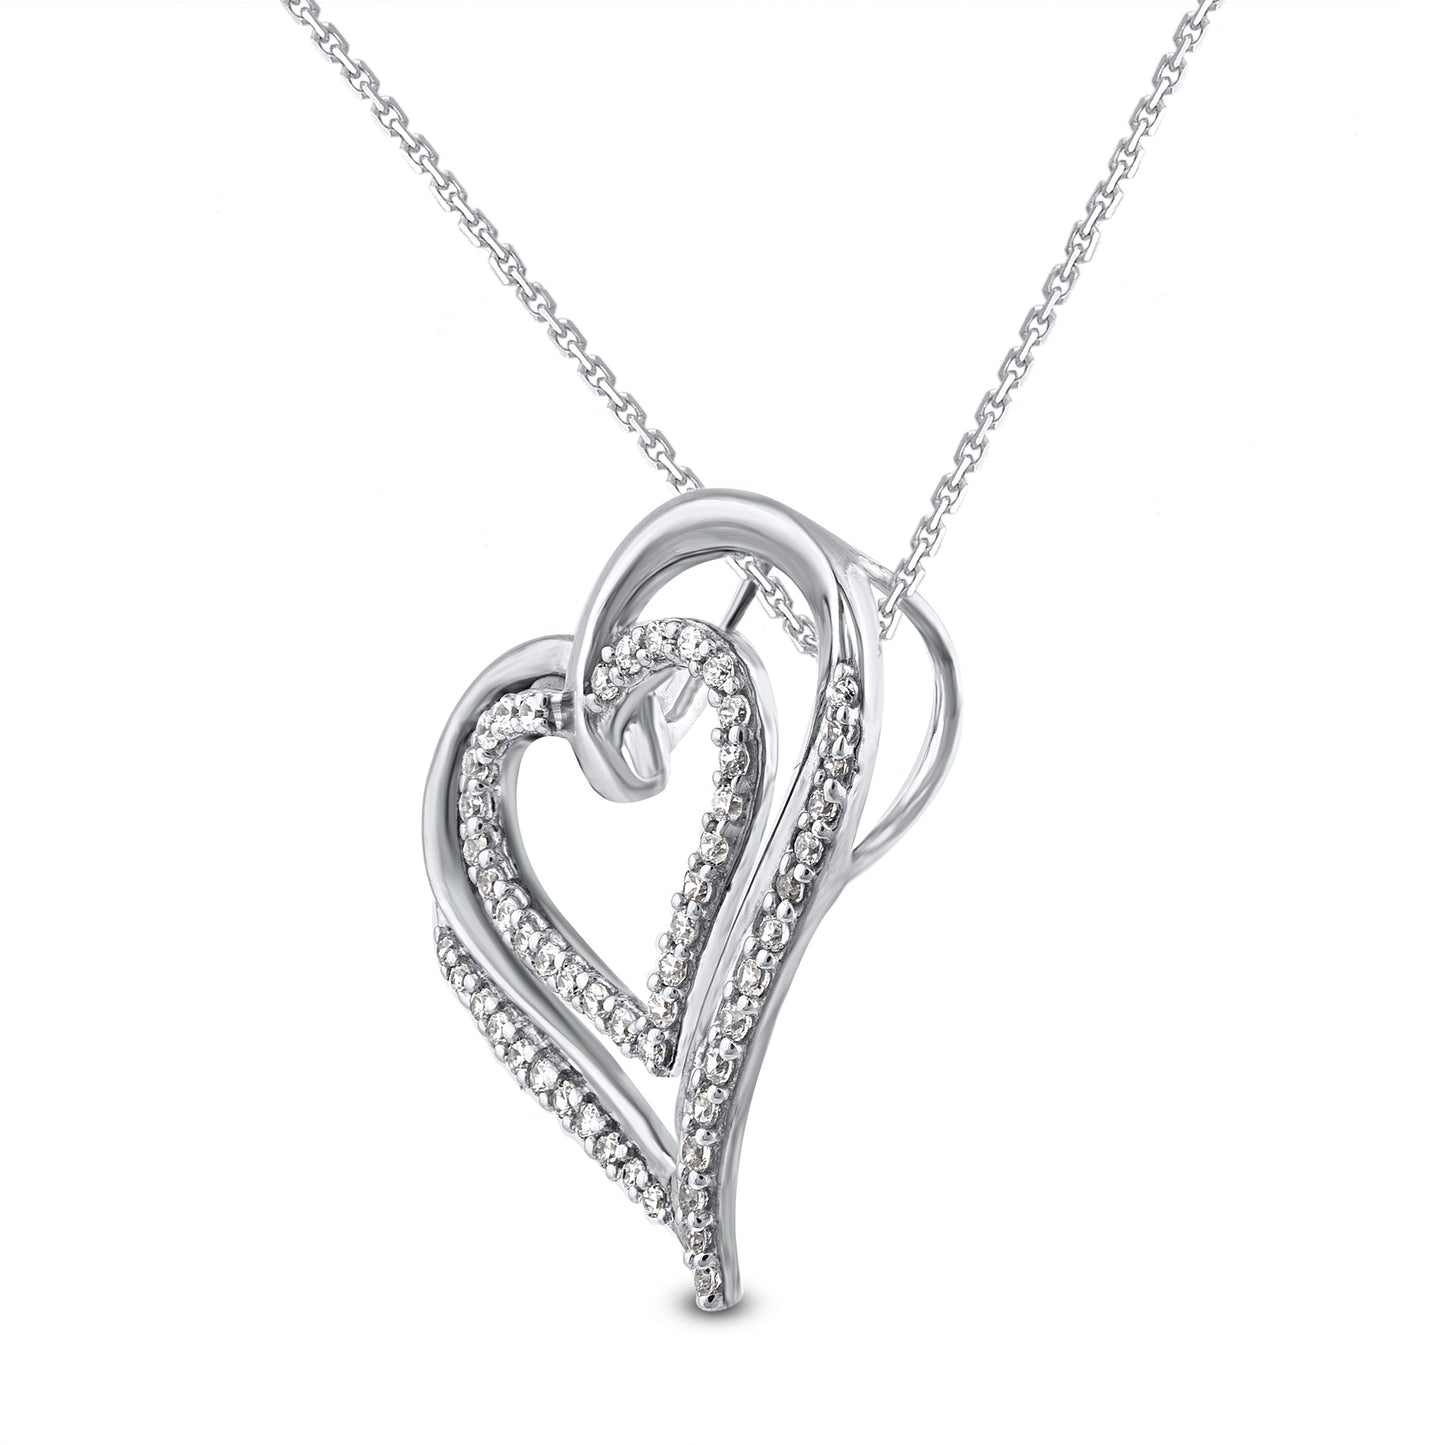 Double Heart Pendant Necklace in 925 Sterling Silver